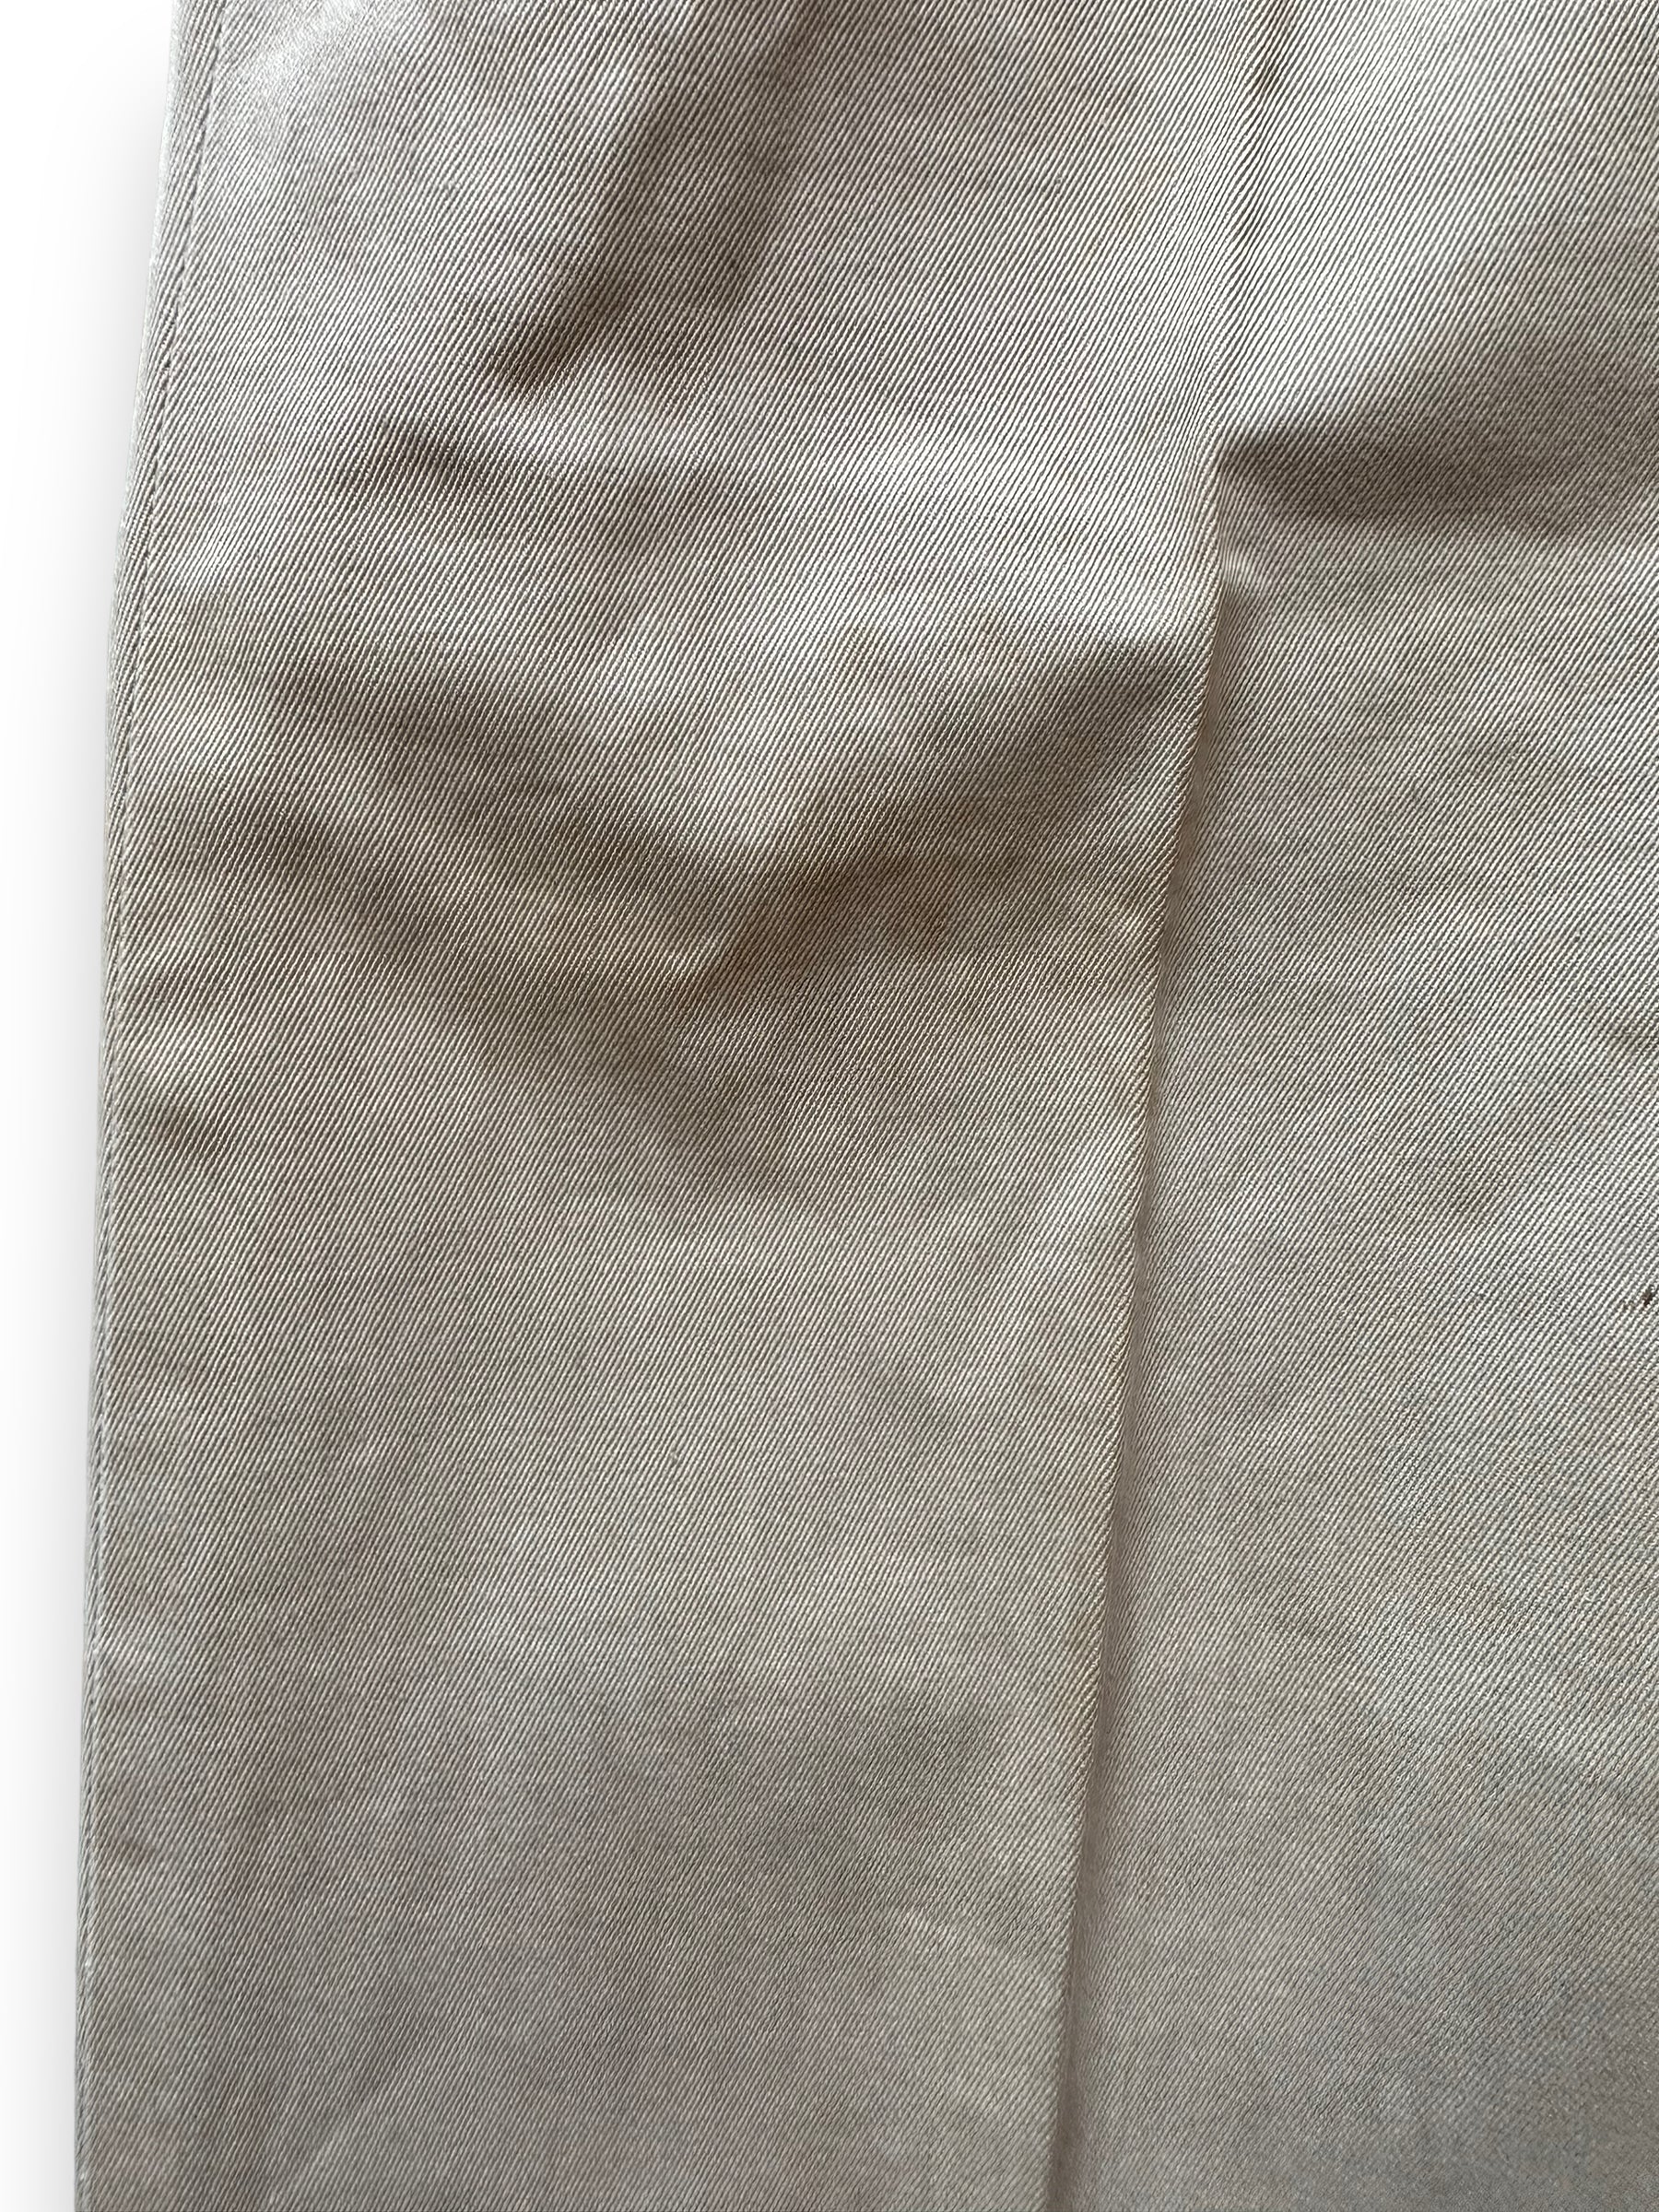 Storage Stain on Right Leg of Vintage 1955 Military Twill Trousers W31 | Barn Owl Vintage Seattle | Vintage Military Chinos Seattle